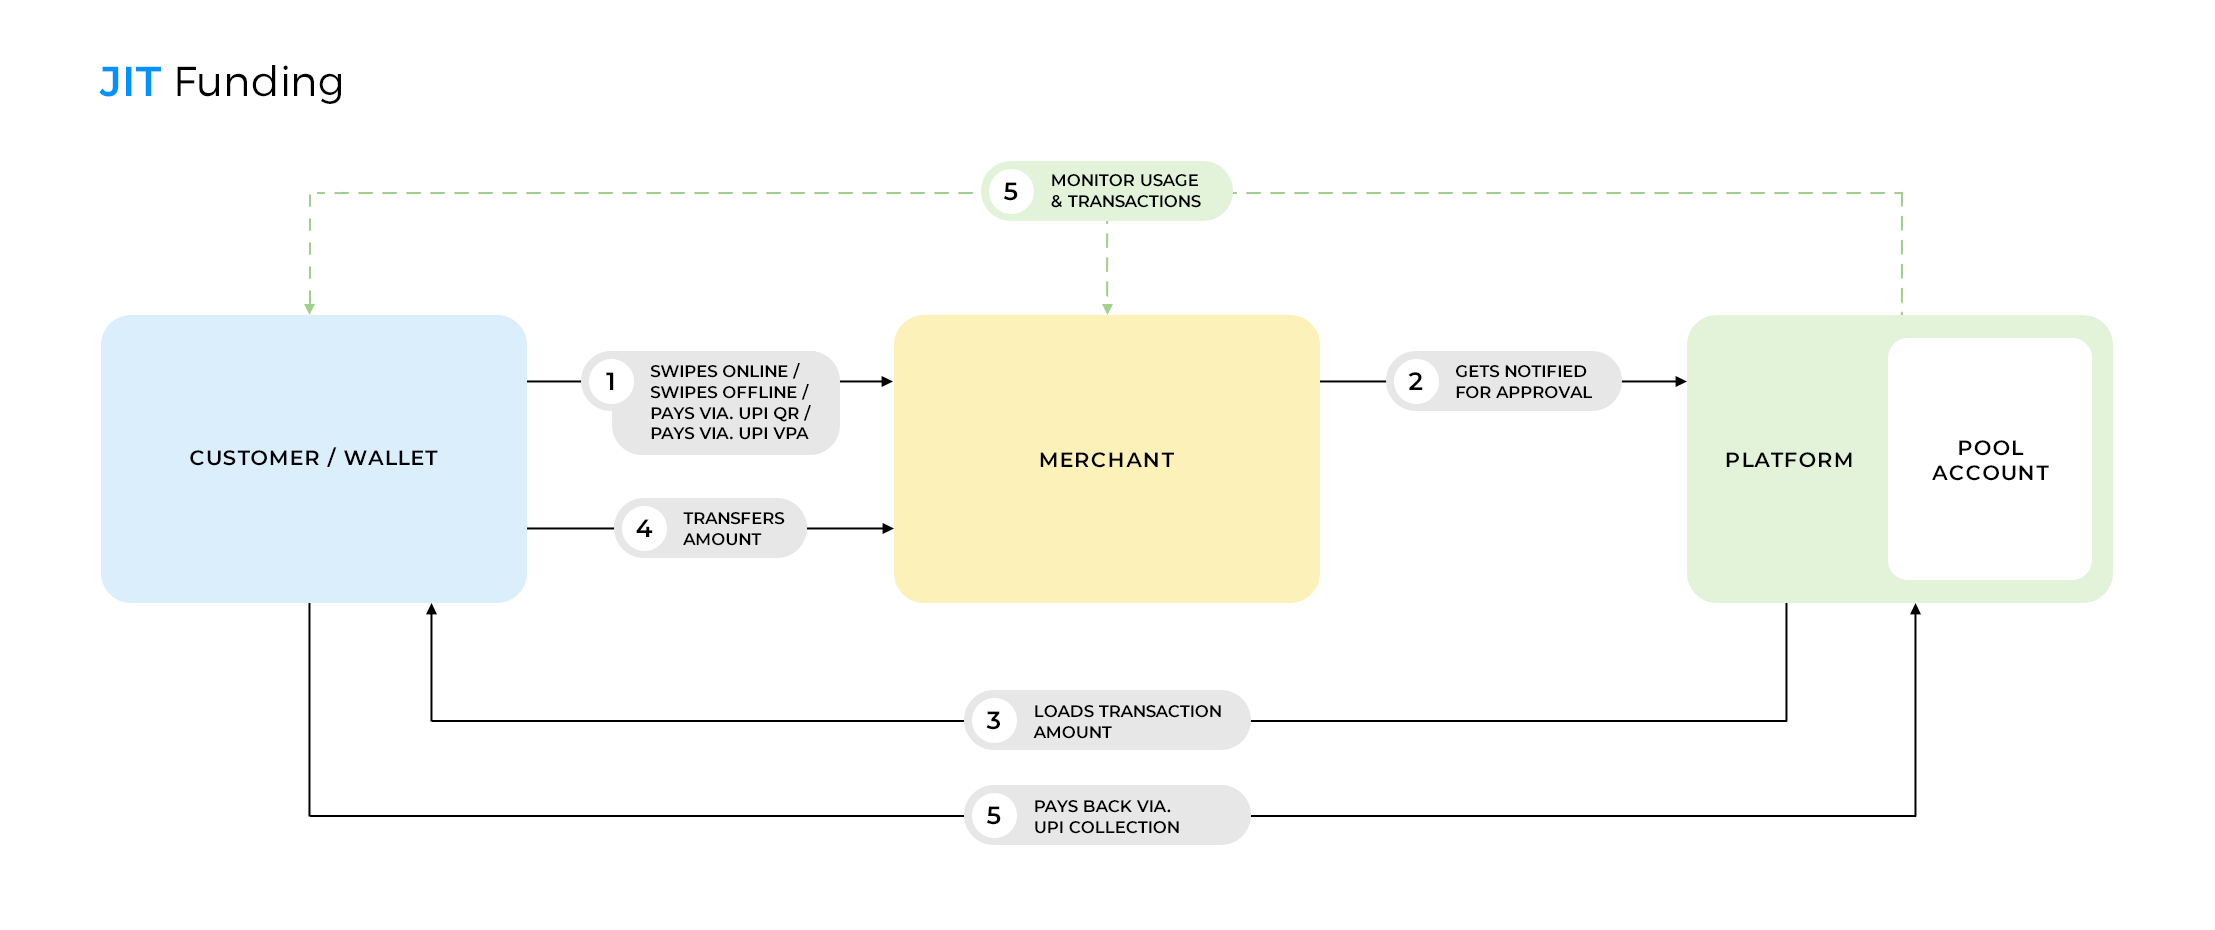 A workflow showing how prepaid cards work with just-in-time or JIT funding. 